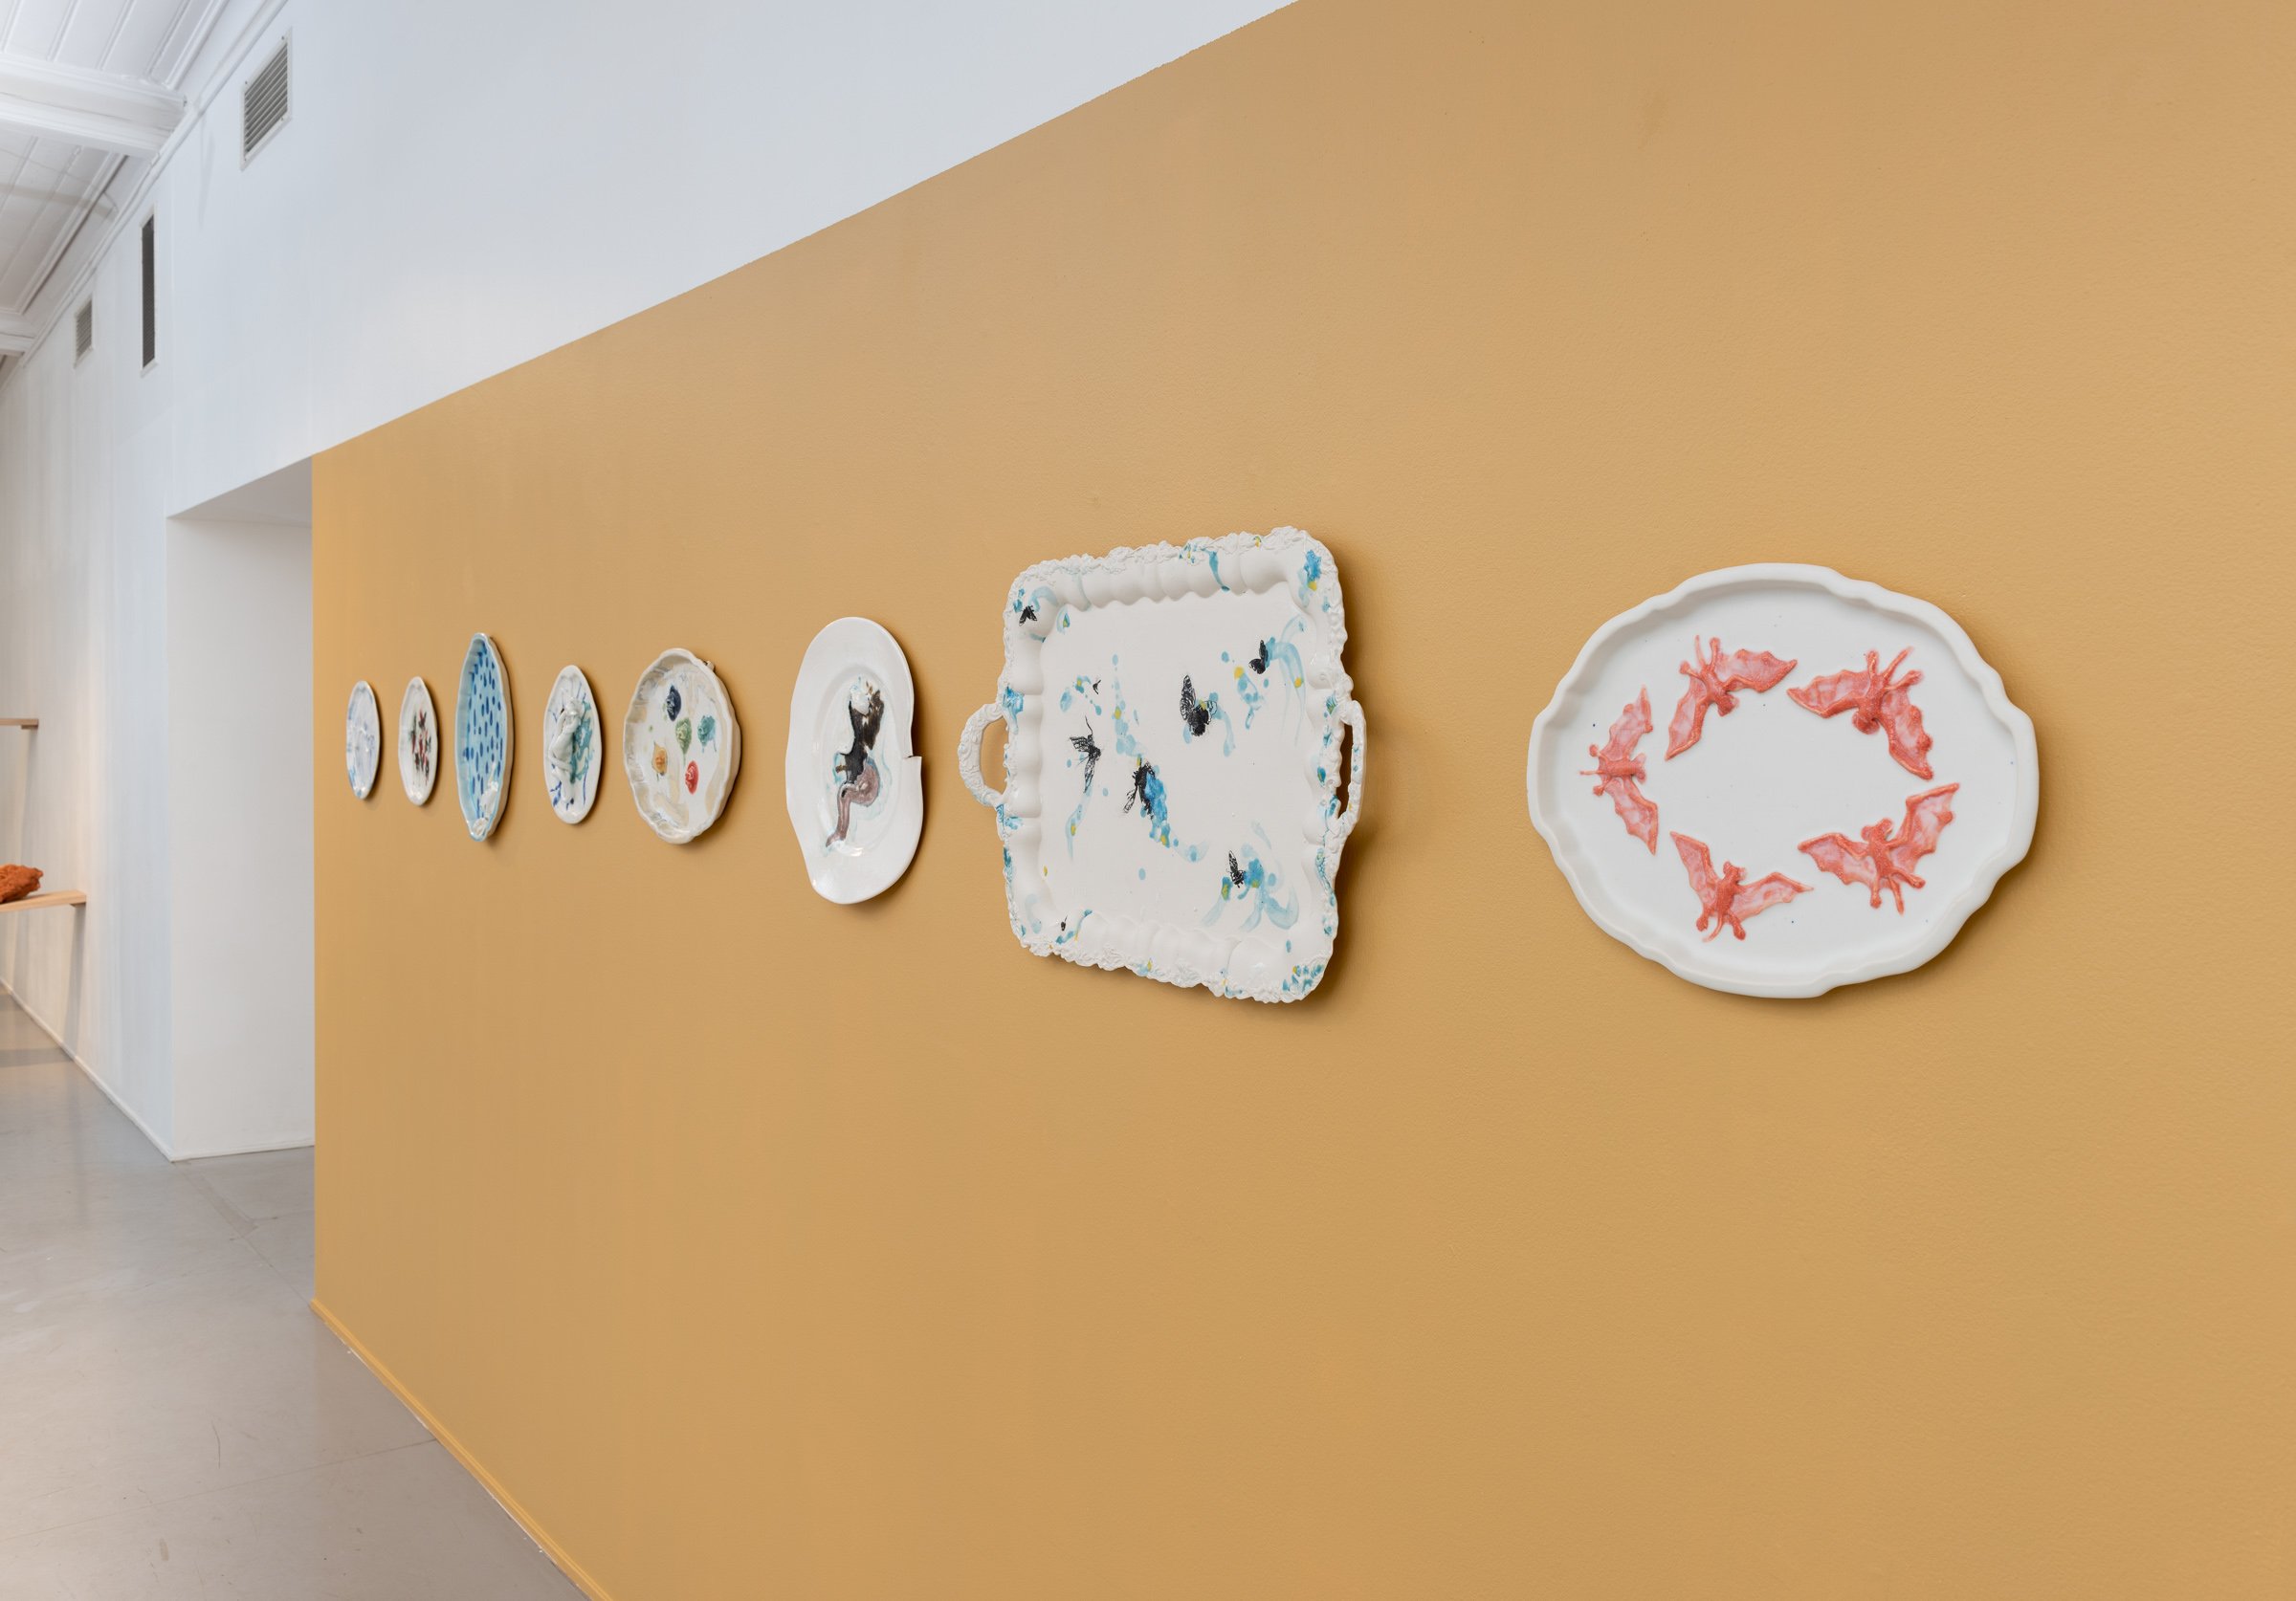  Why do Europeans put plates on their walls | 2022  Overview  Photo: Thomas Tveter 